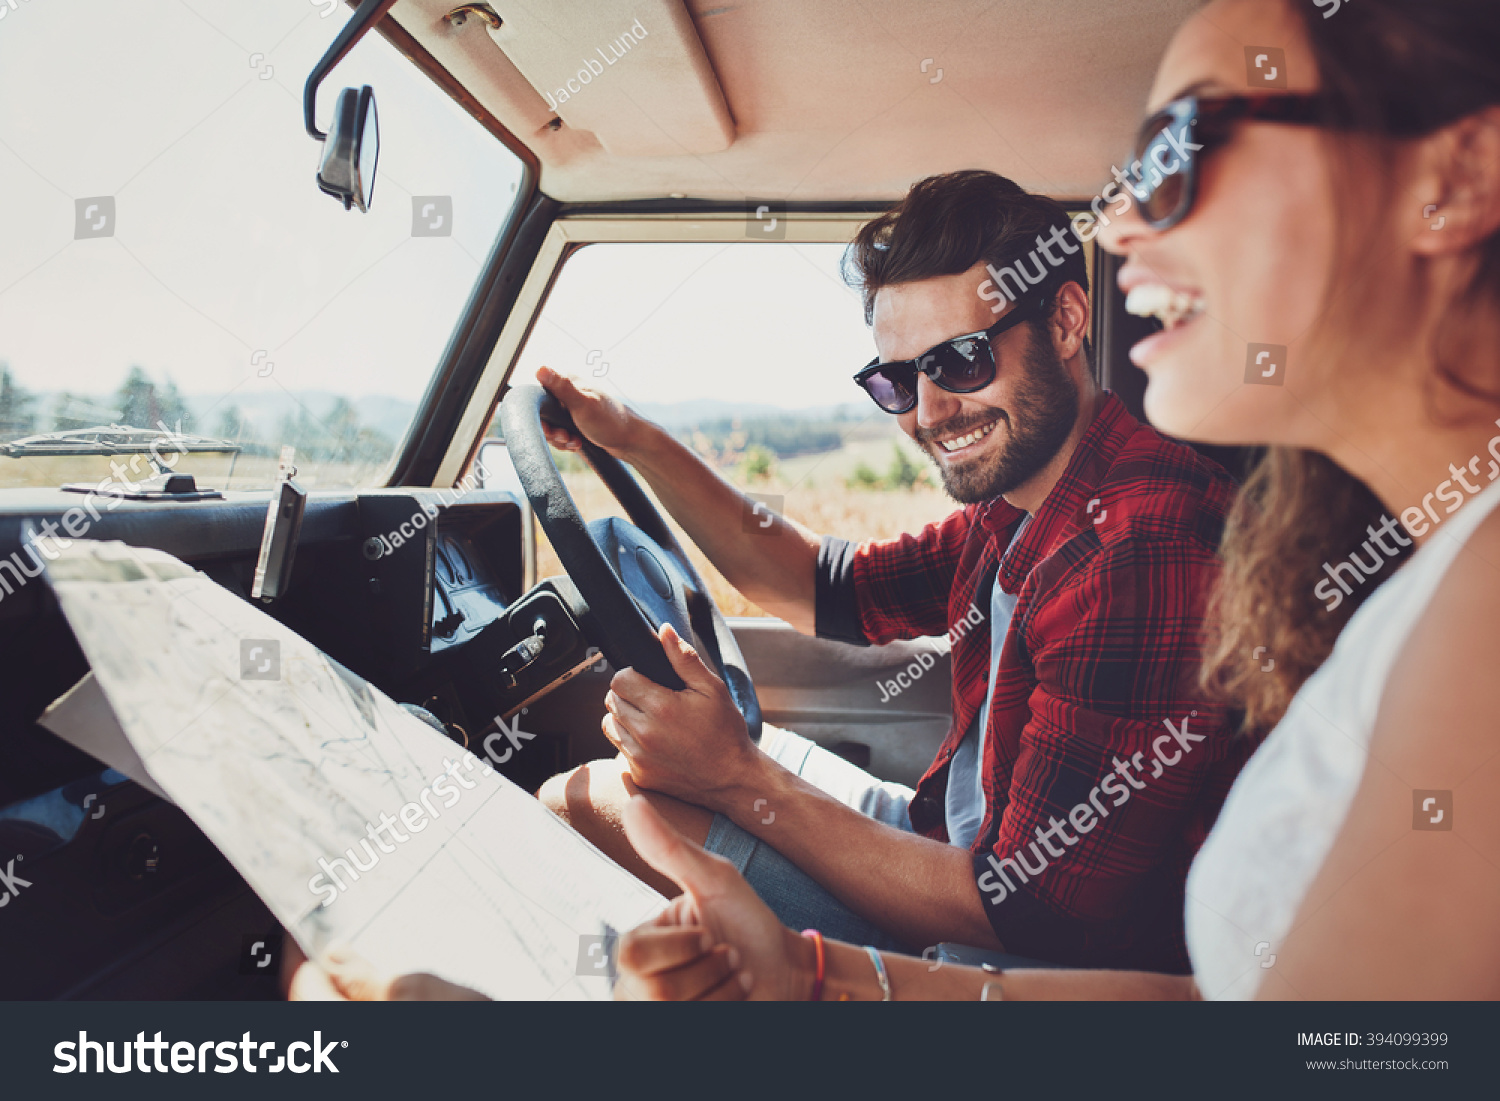 Happy young couple with a map in the car. Smiling man and woman using map on roadtrip. #394099399